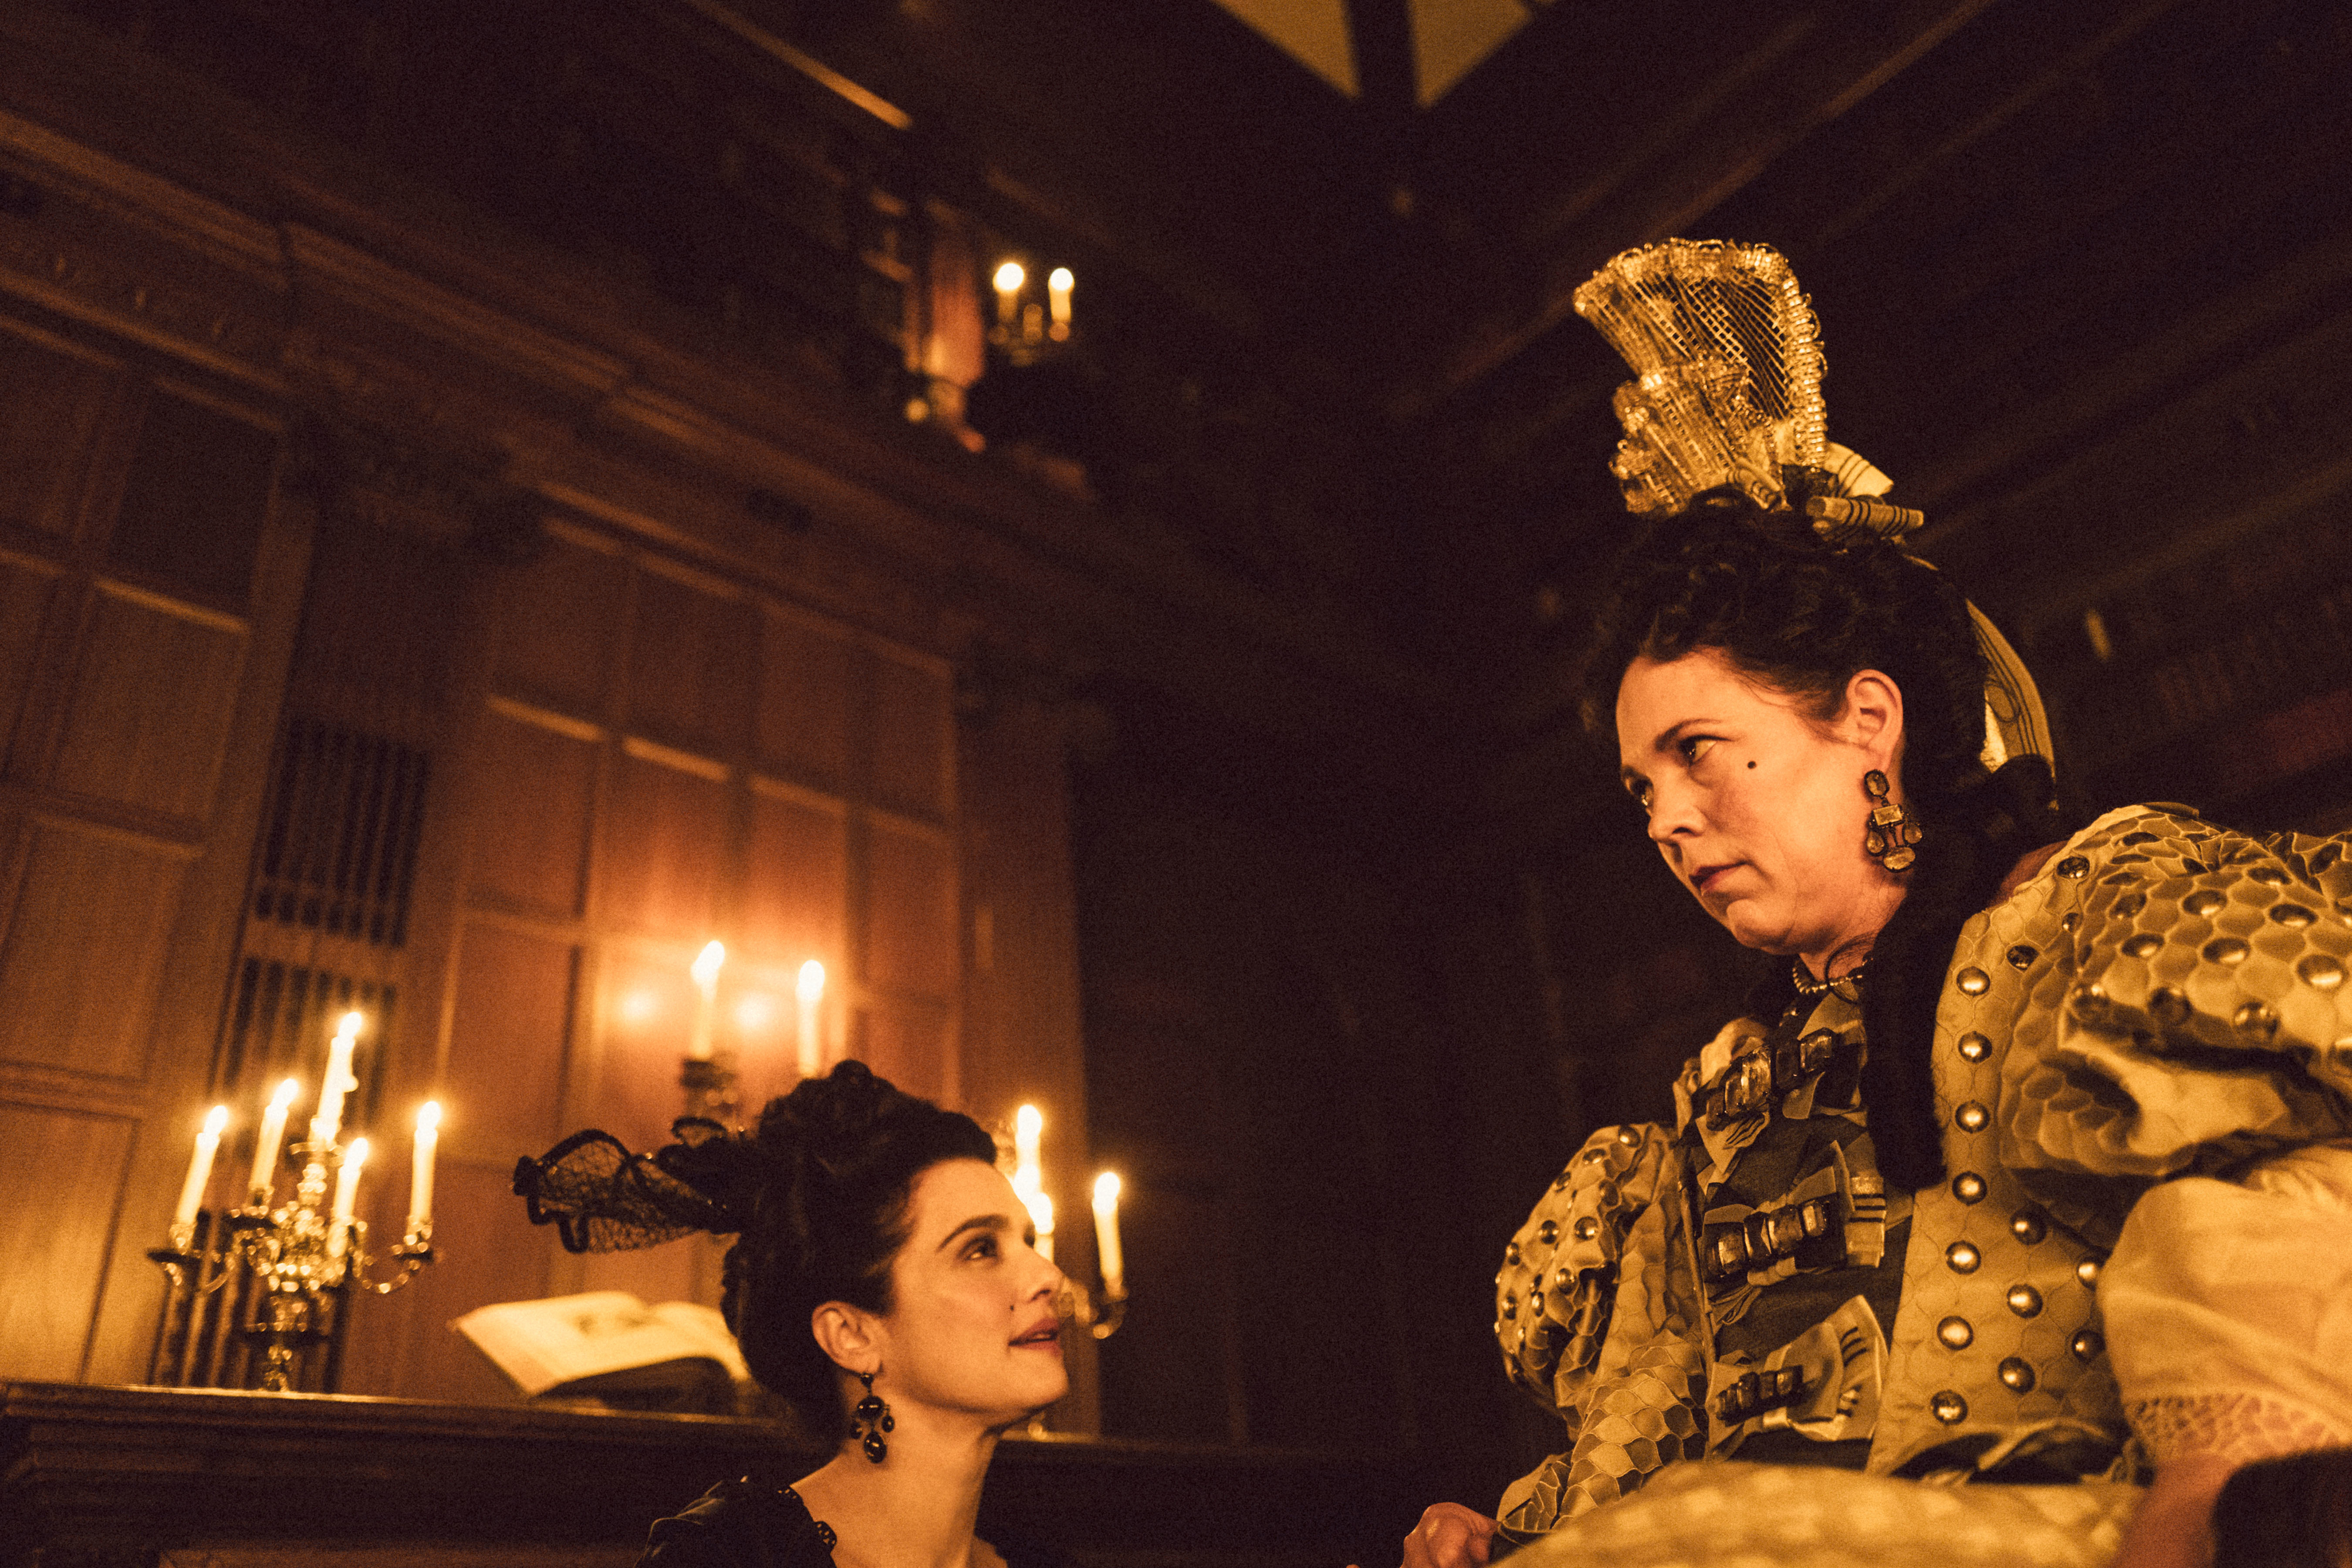 Rachel Weisz and Olivia Colman in elaborate period costumes by candlelight